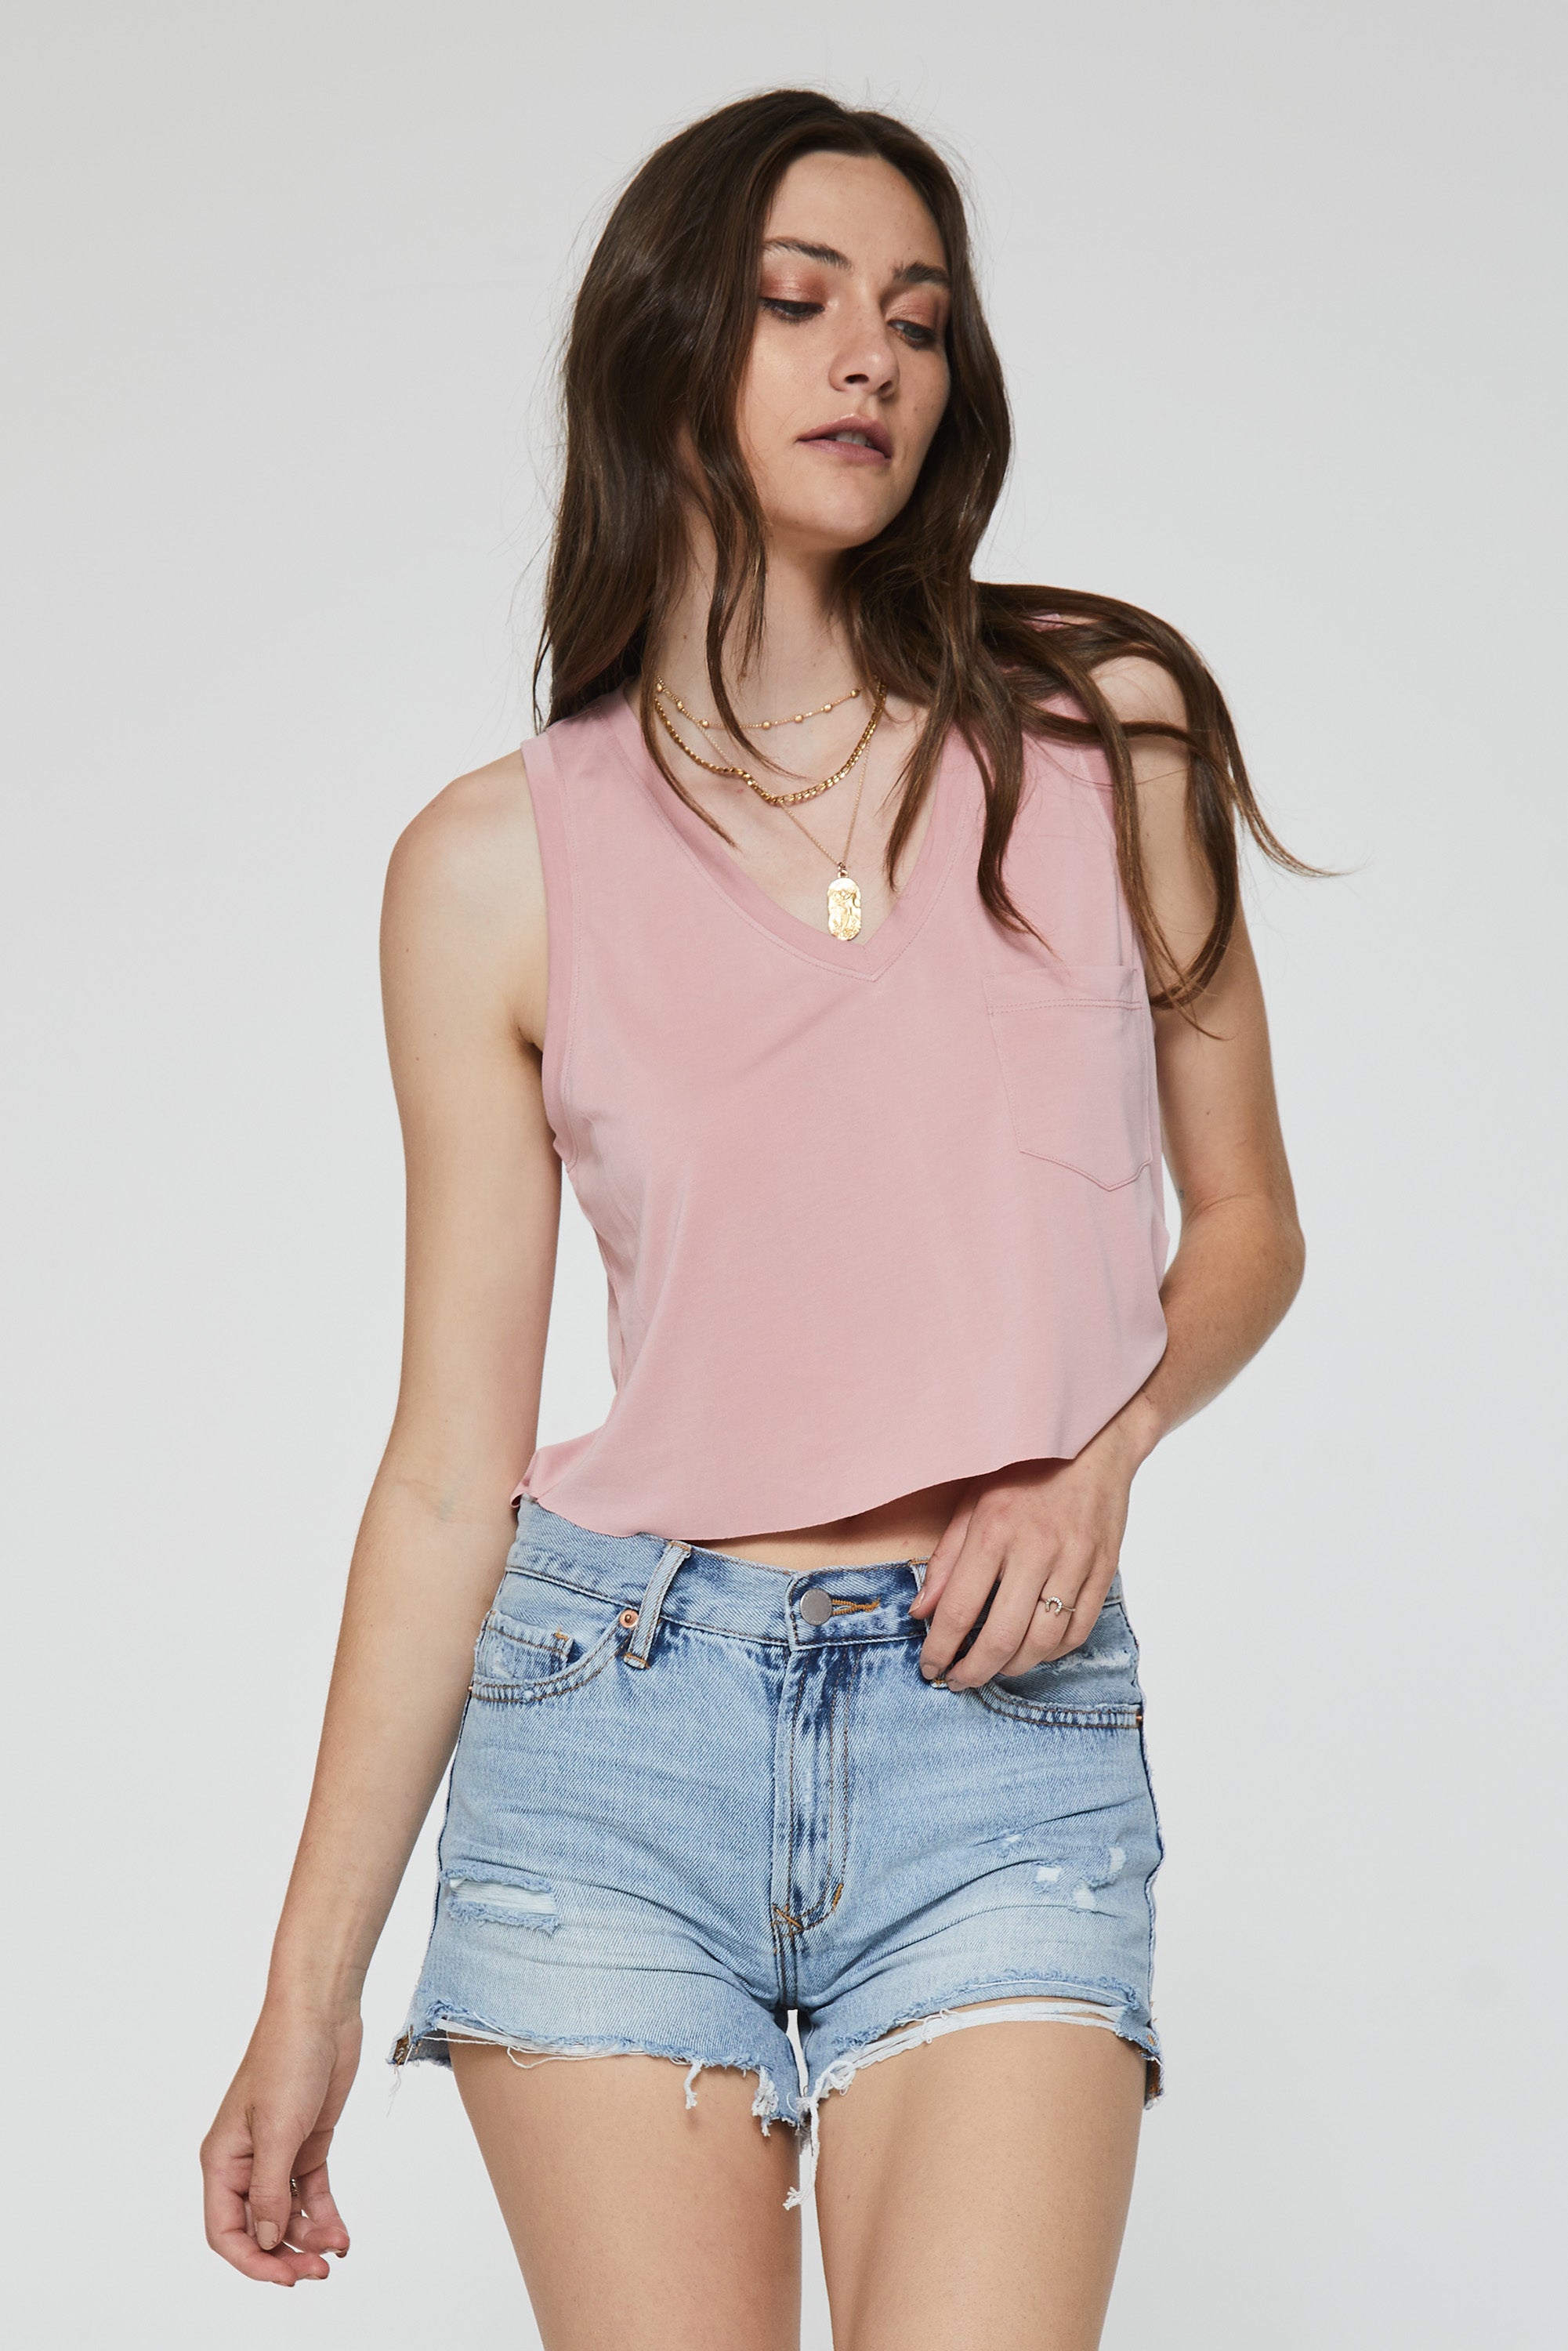 baby-esther-pocket-tank-rose-quartz-front-image-another-love-clothing